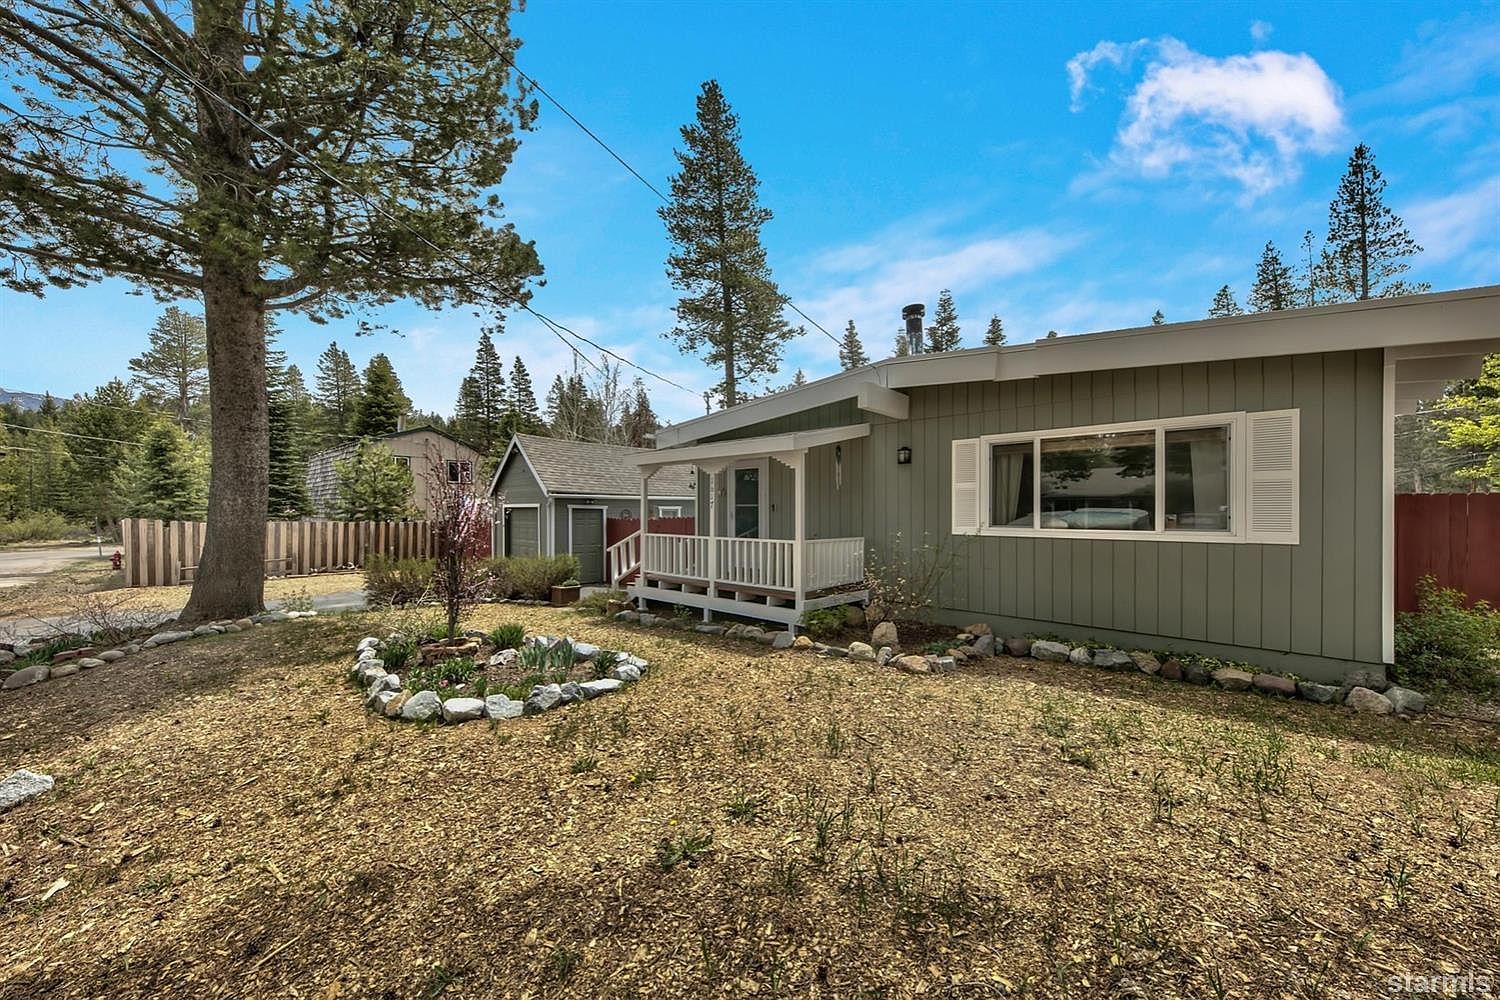 1617 Choctaw St South Lake Tahoe Ca 96150 Zillow